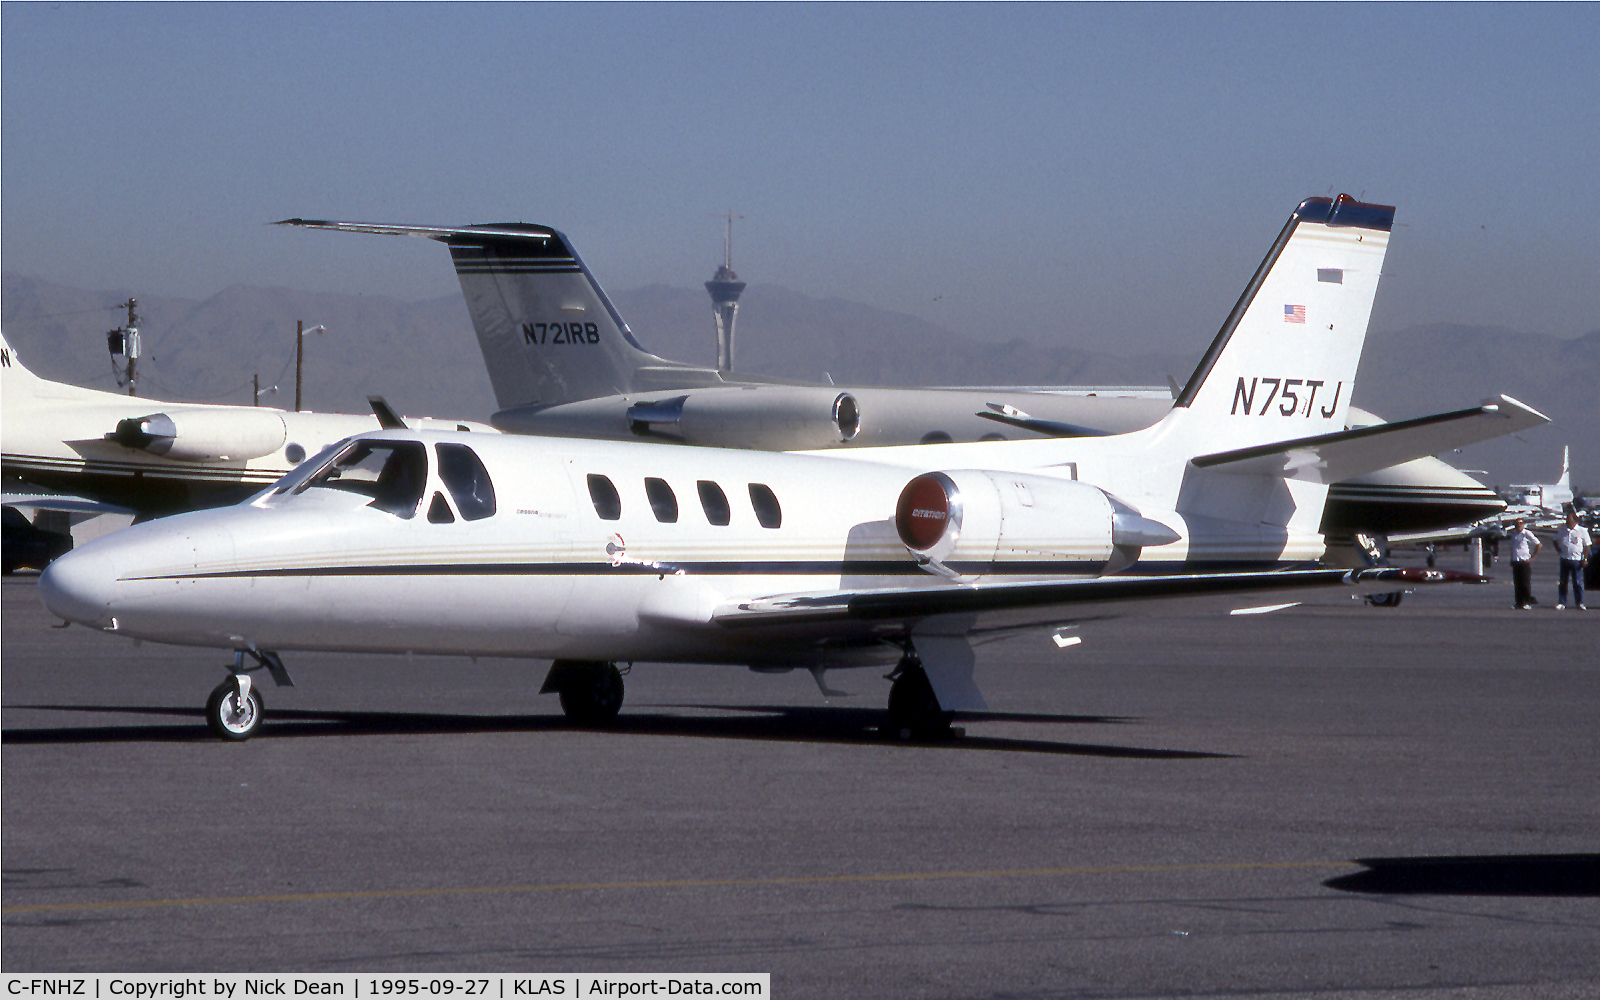 C-FNHZ, 1985 Cessna 501 Citation I/SP C/N 501-0689, KLAS (Seen here as N75TJ at NBAA this airframe is now registered C-FNHZ as posted)